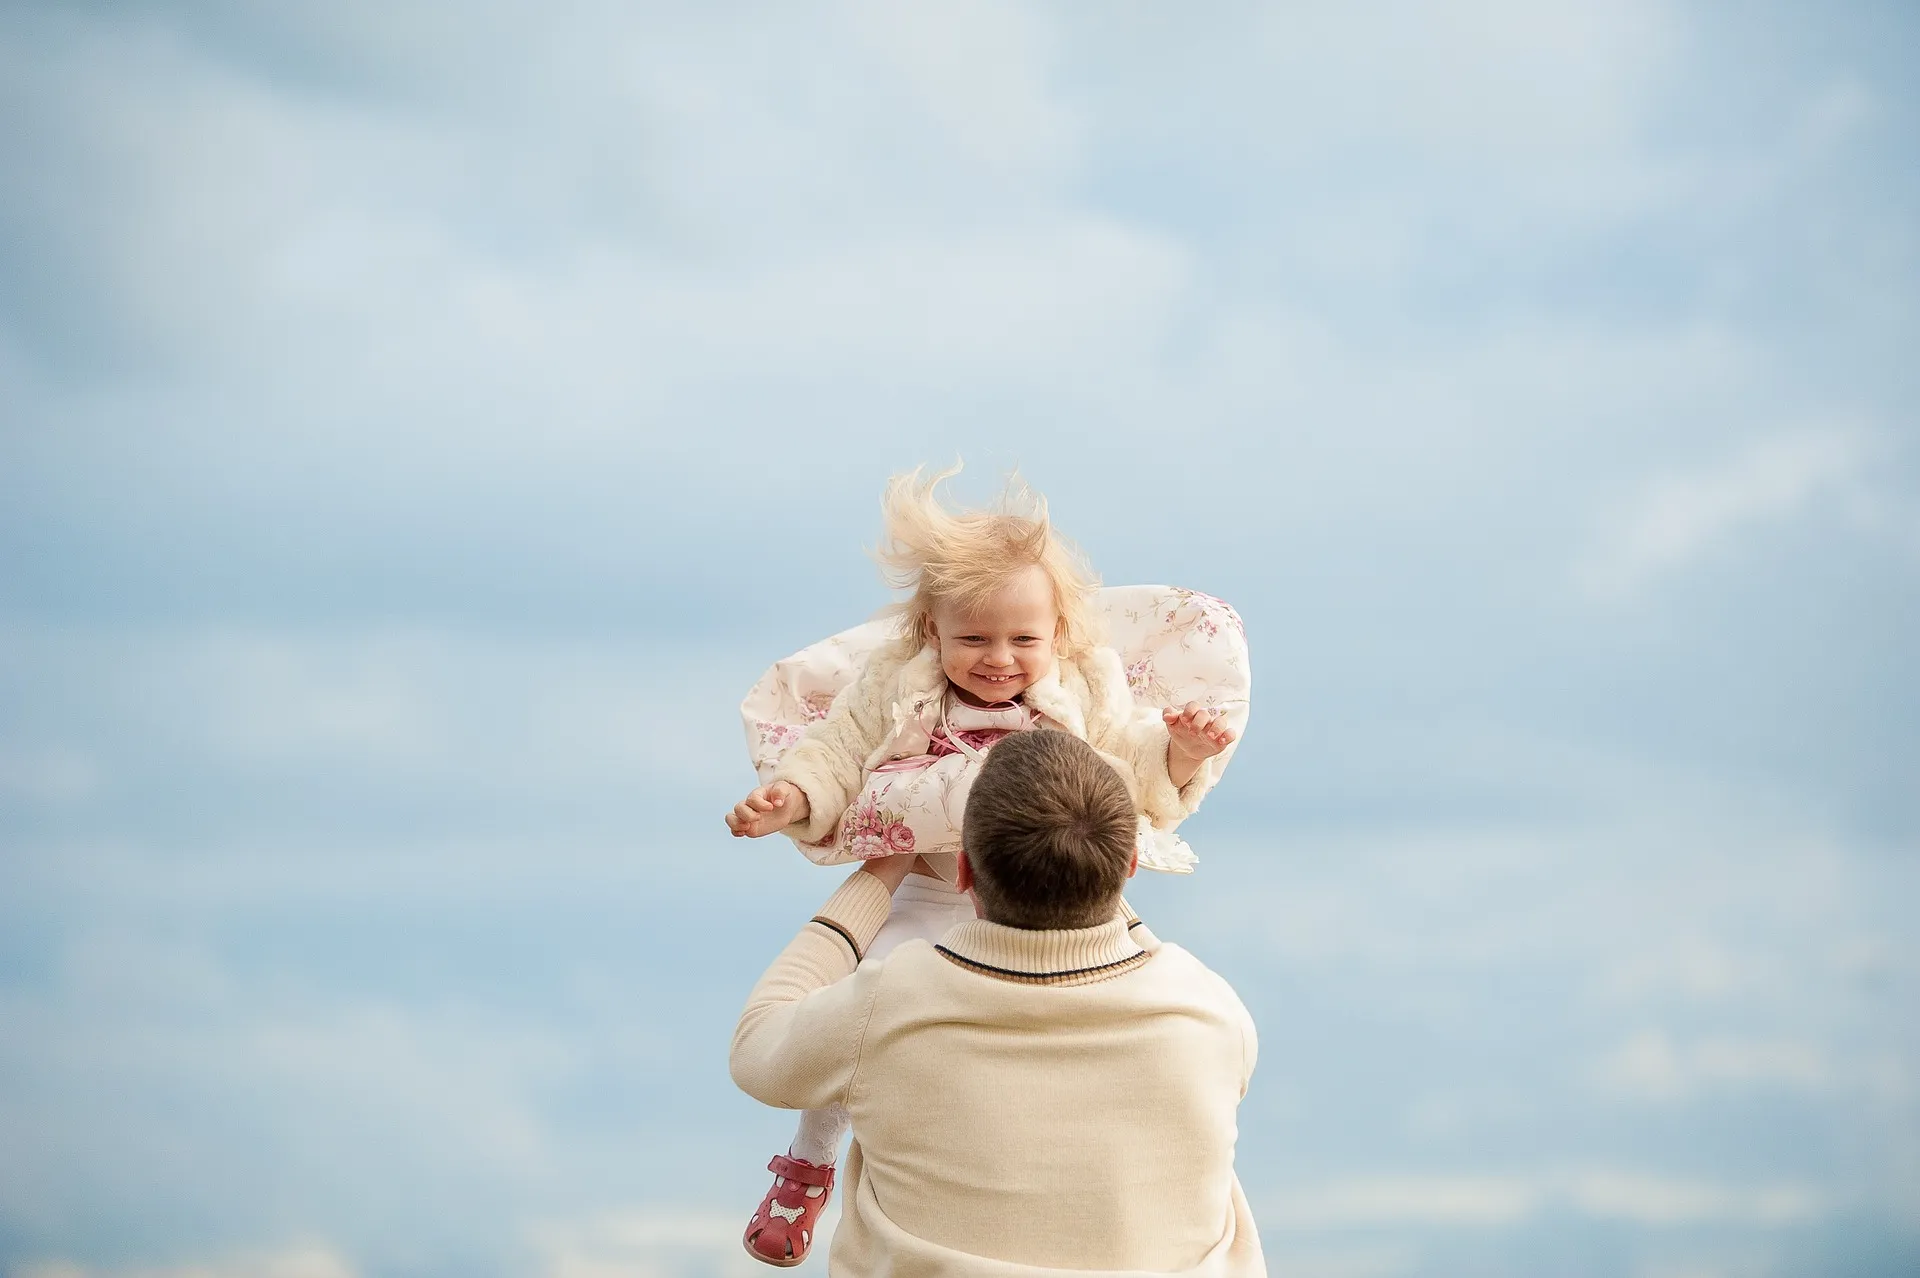 An adult male playfully raises a small girl into the air, showcasing their shared happiness.